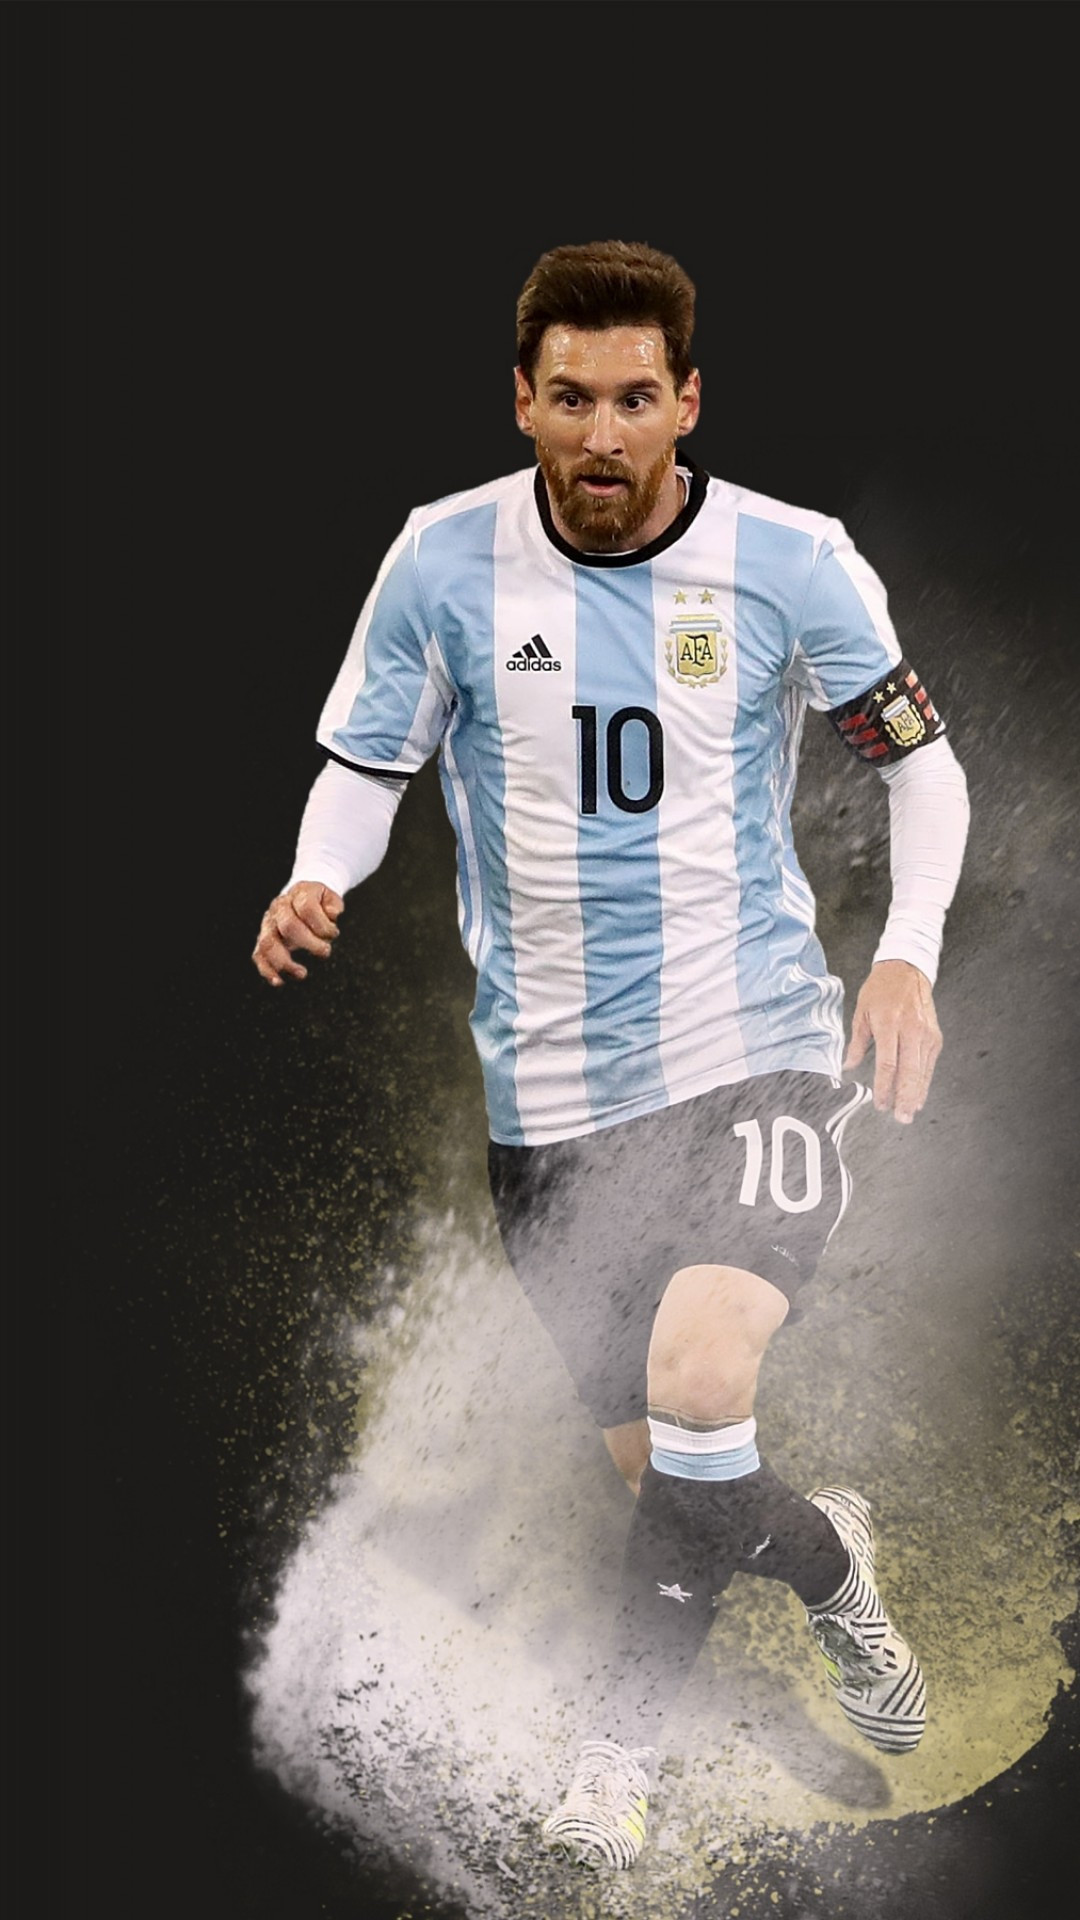 Download 1080x1920 Lionel Messi, Football Wallpaper for iPhone iPhone 7 Plus, iPhone 6+, Sony Xperia Z, HTC One